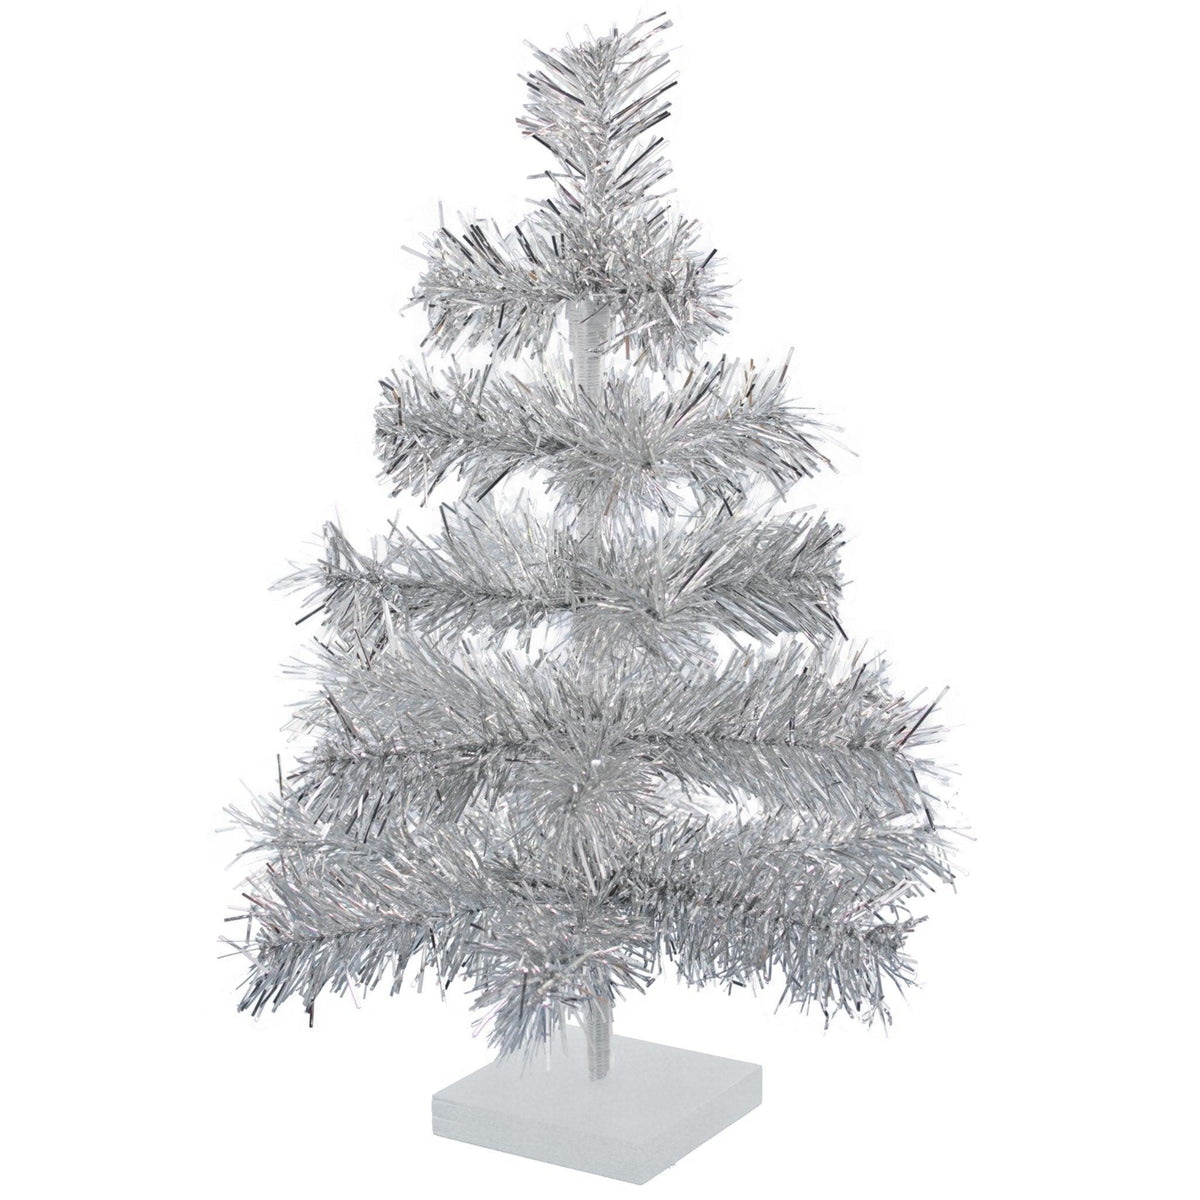 Silver Mini Pine Tree With Wood Stand Small Model Making Silver